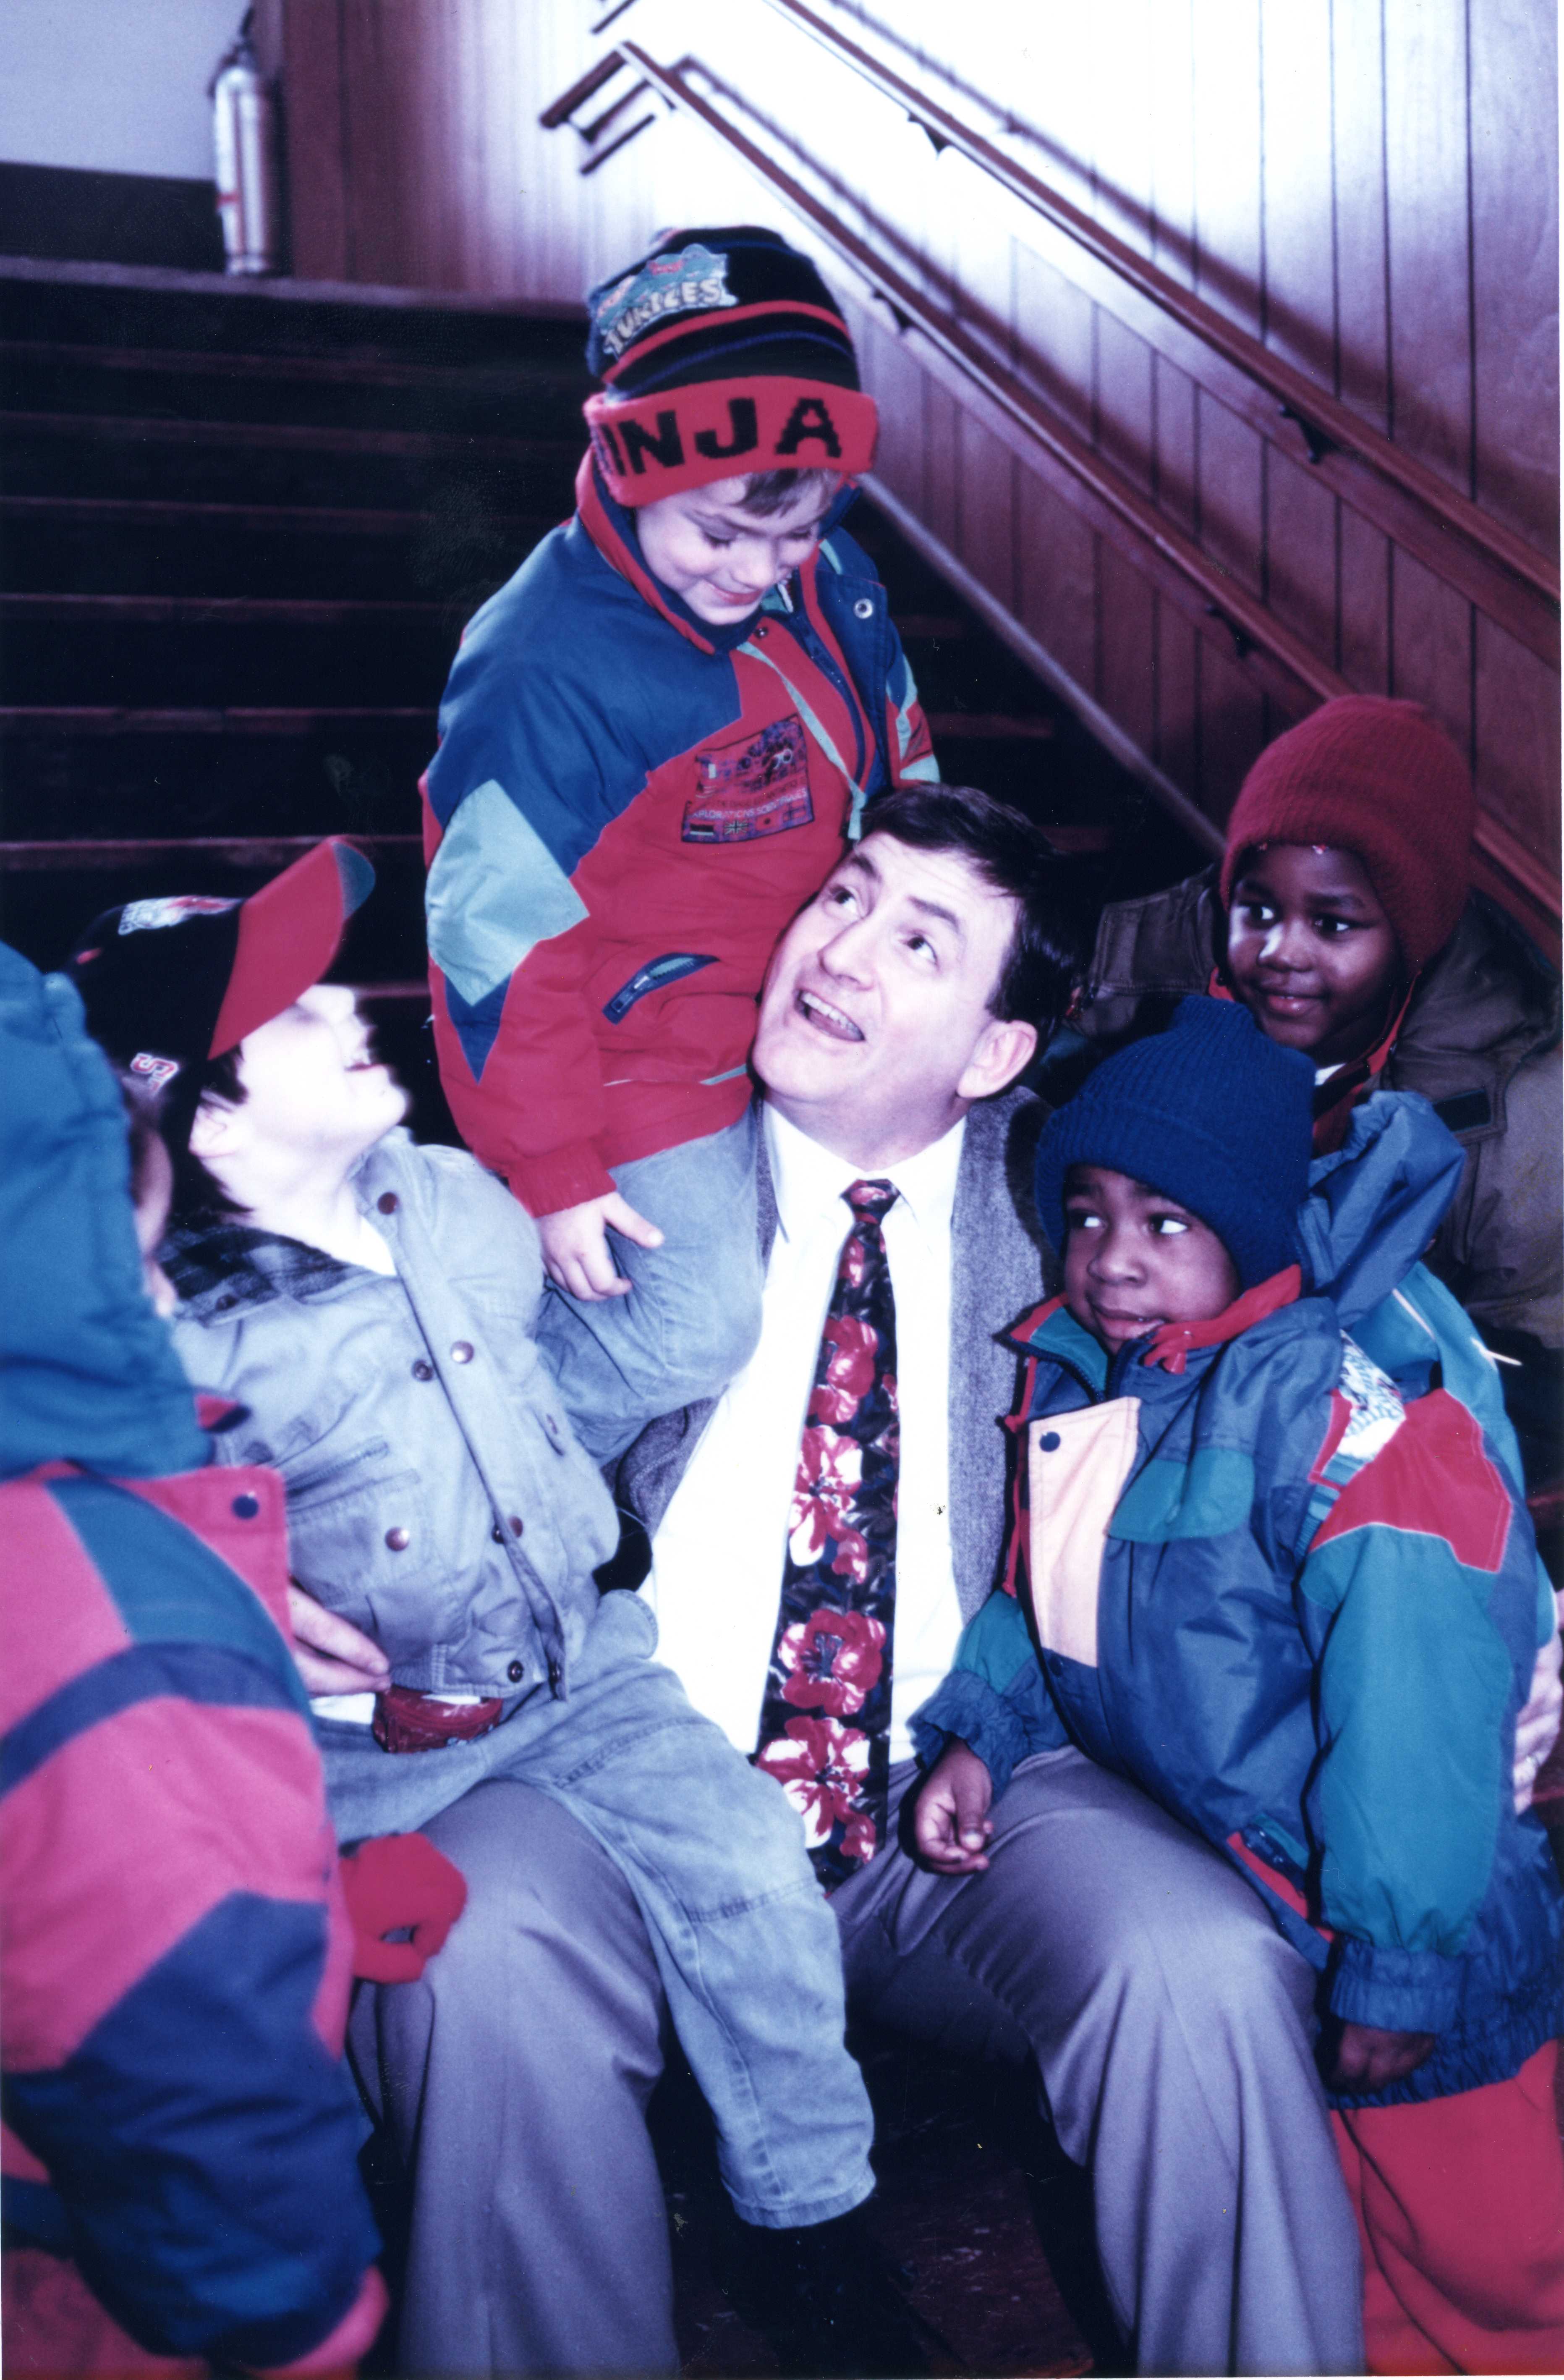 Esselton McNulty in the 1980s at the Pawtucket YMCA